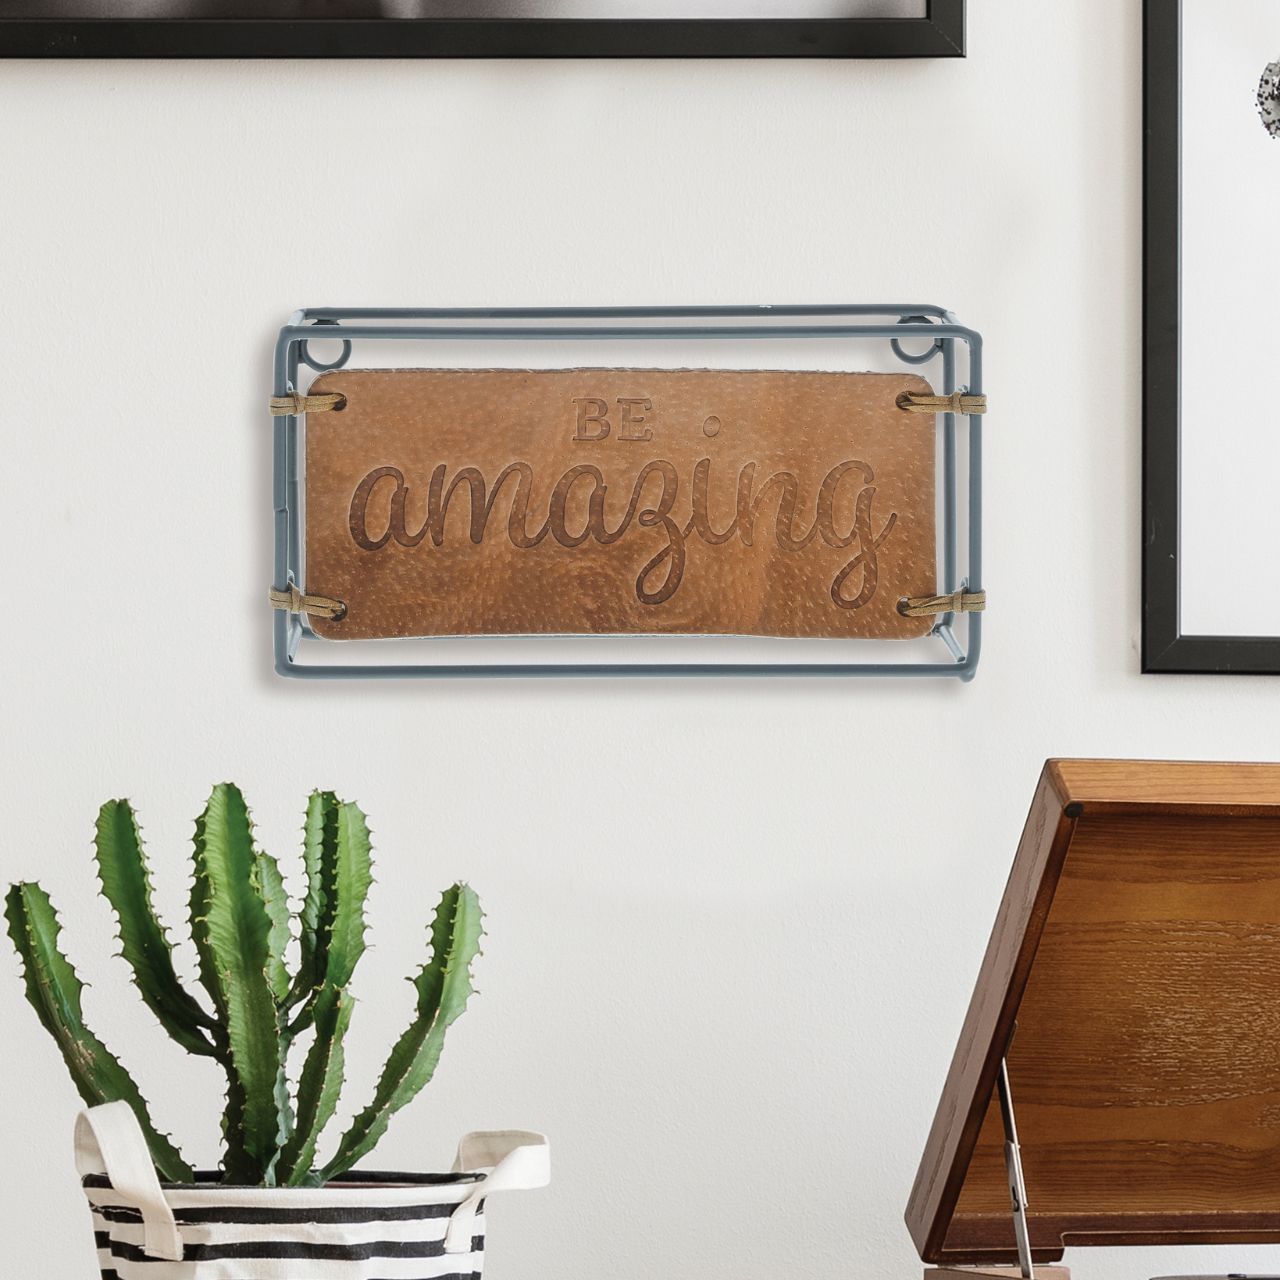 Be Amazing Plaque  The Impressions collection expresses appreciation of home and family in enduring leather creations. The Be Amazing Plaque adorns the home with an inspiring message. Made of iron and leather.